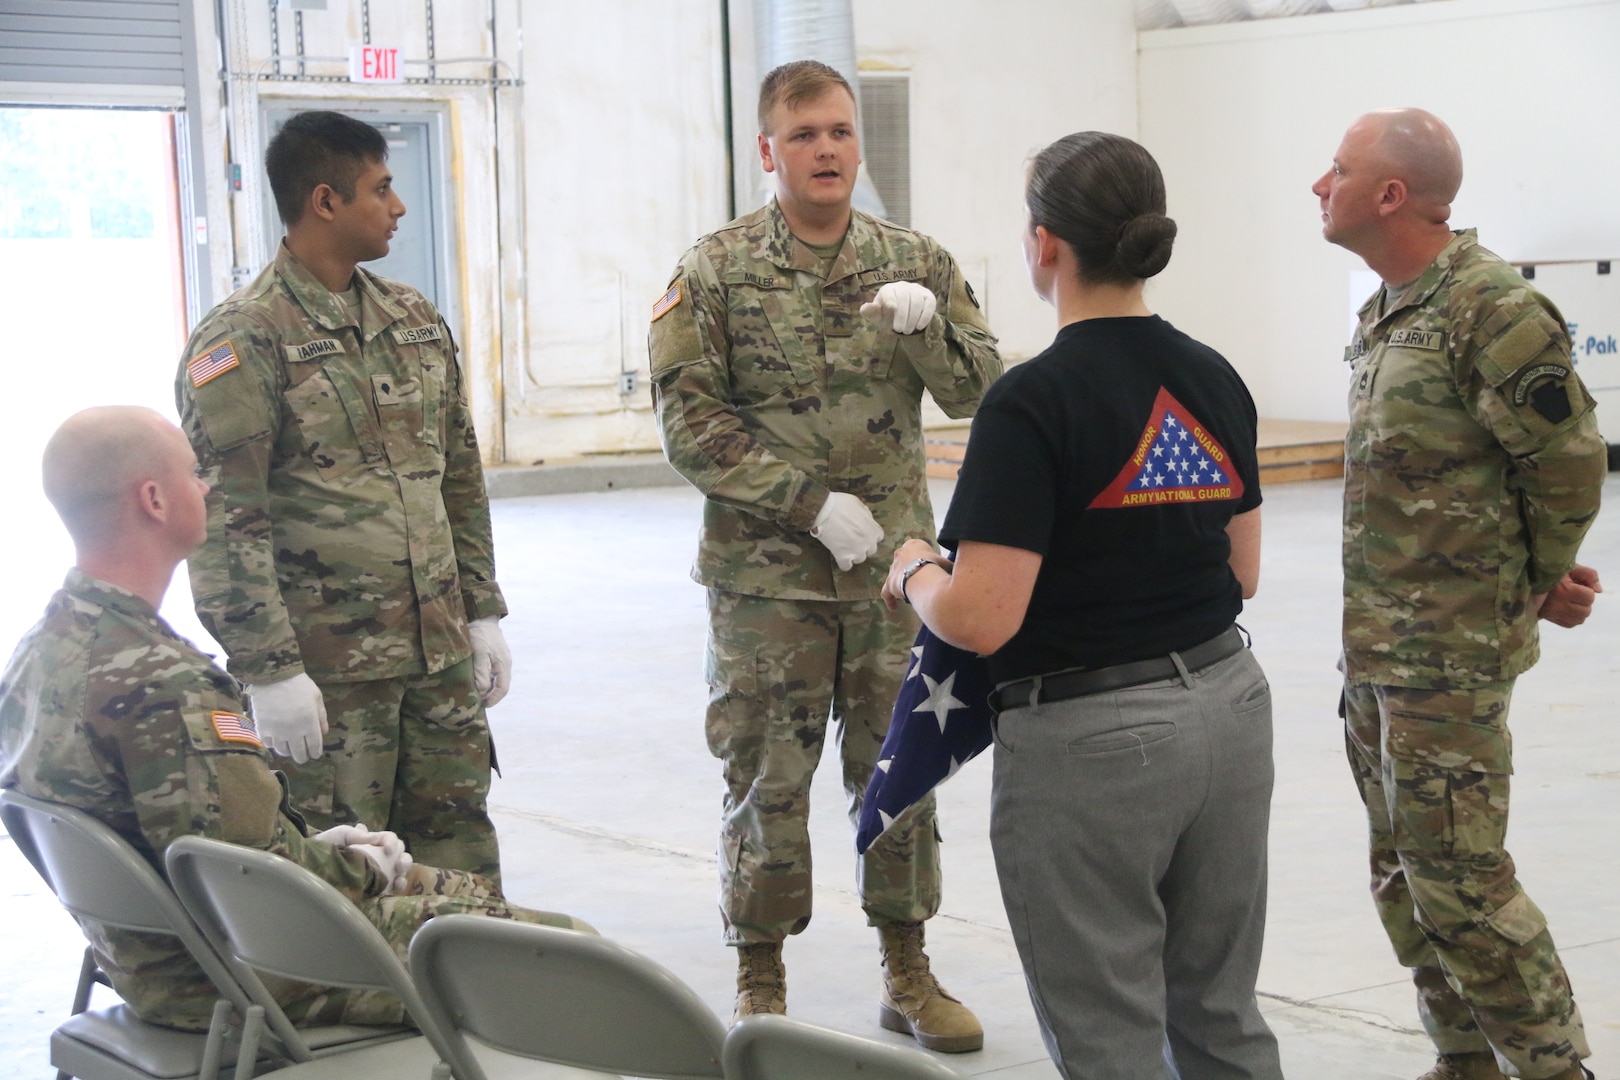 Military Funeral Honors Program hosts National Guard Soldiers from 4 states for funeral honors training